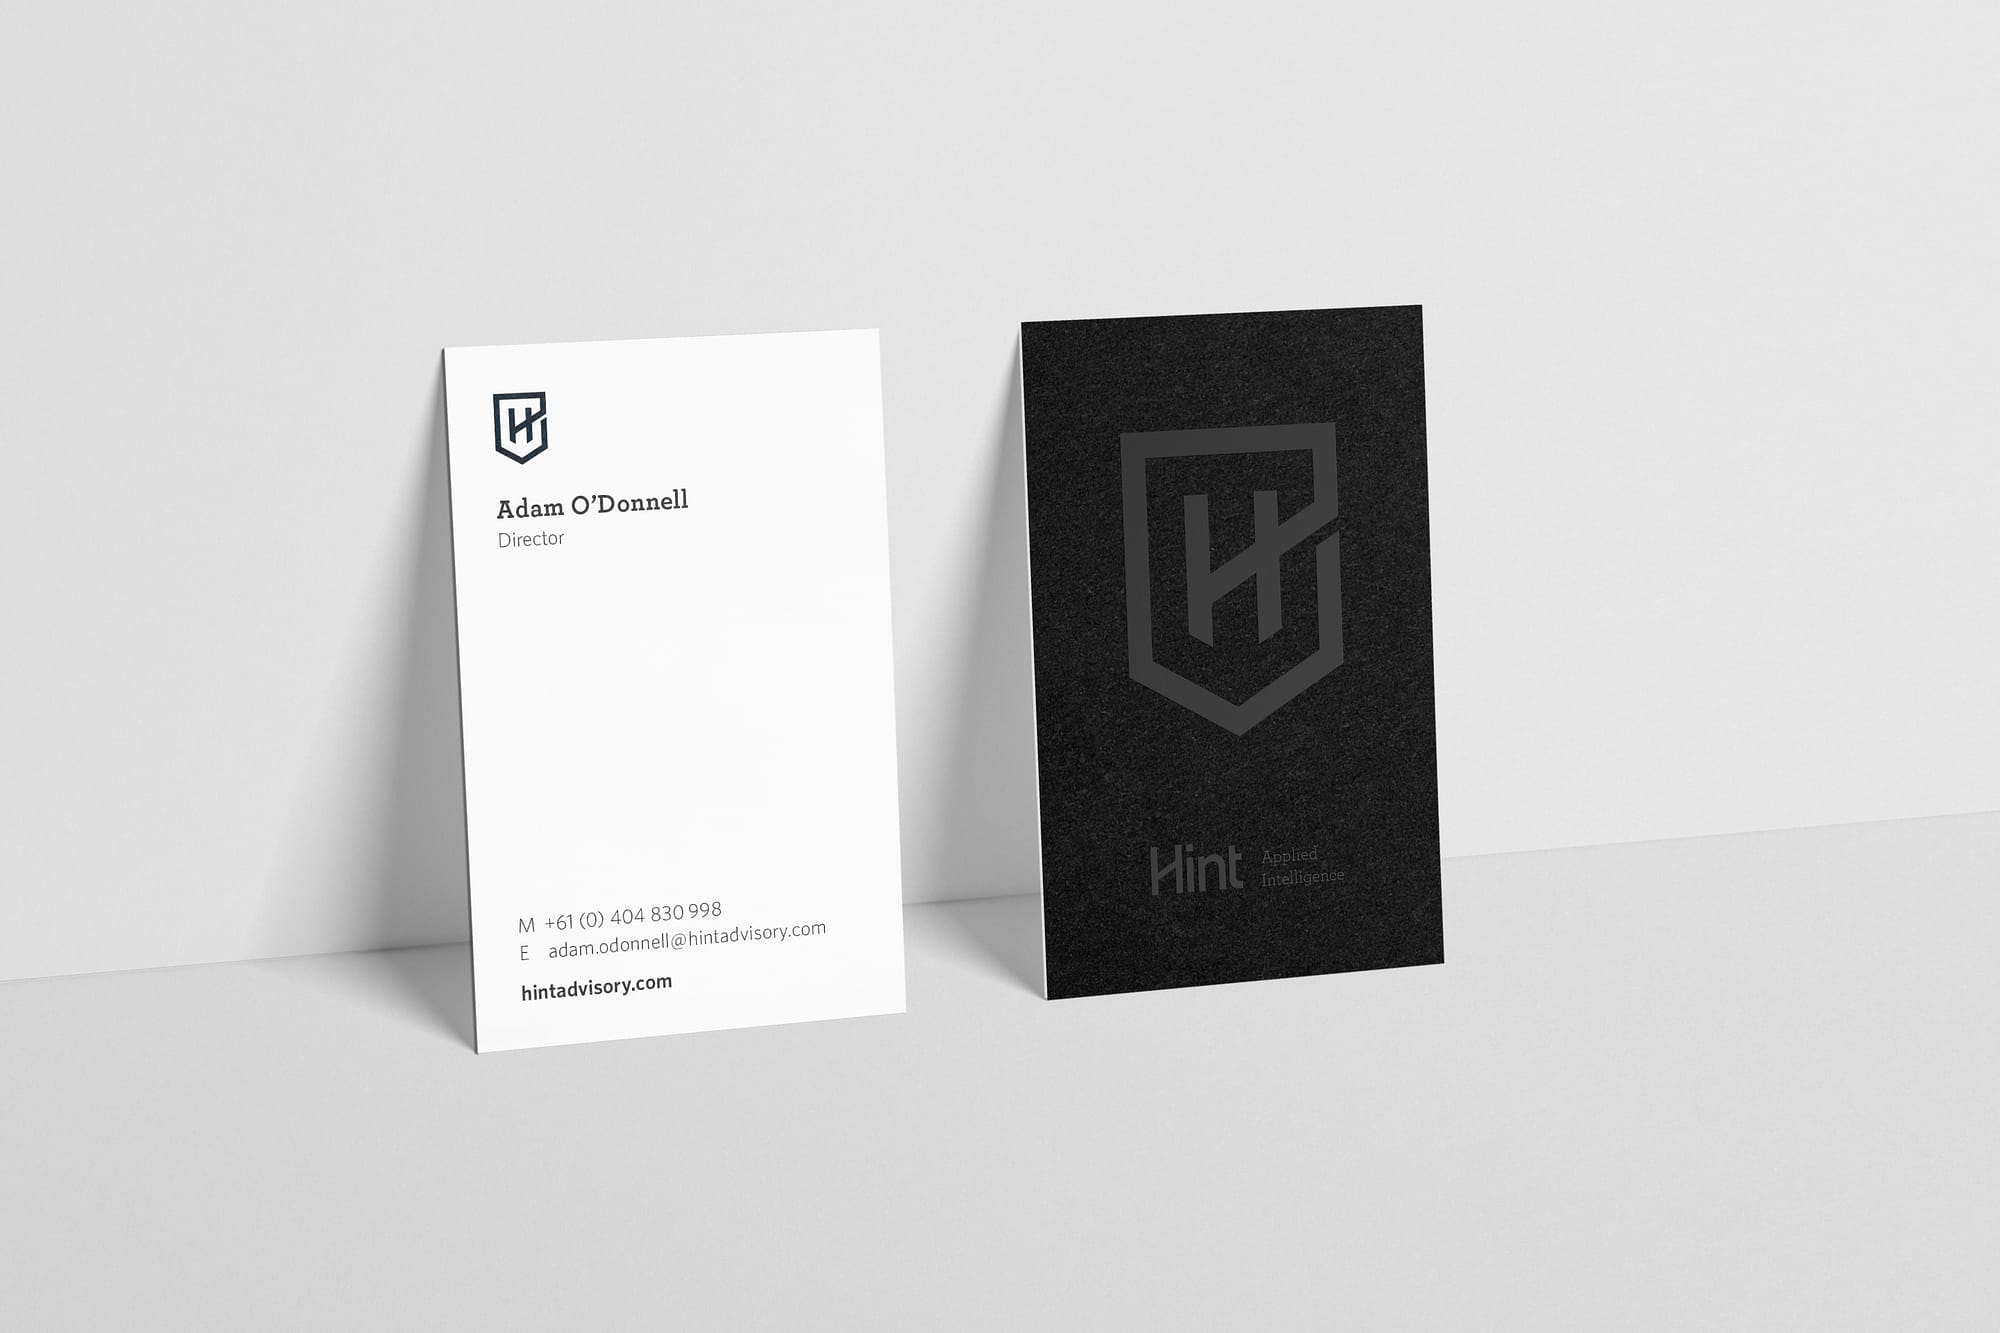 Hint business cards